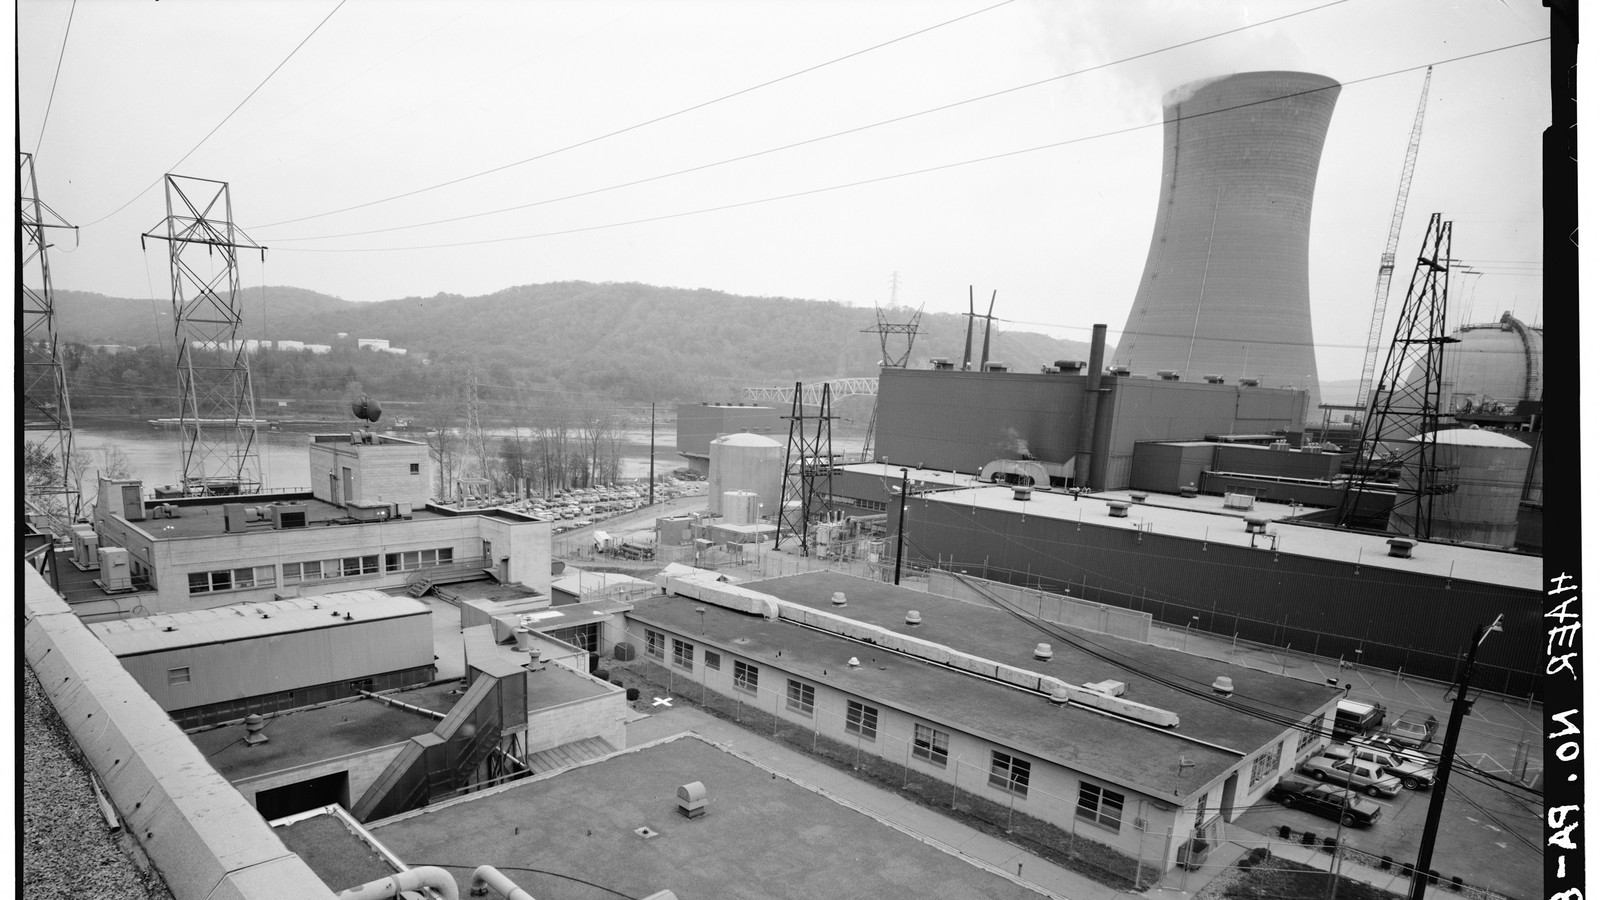 After 60 Years of Nuclear Power, What About the Cleanup? The